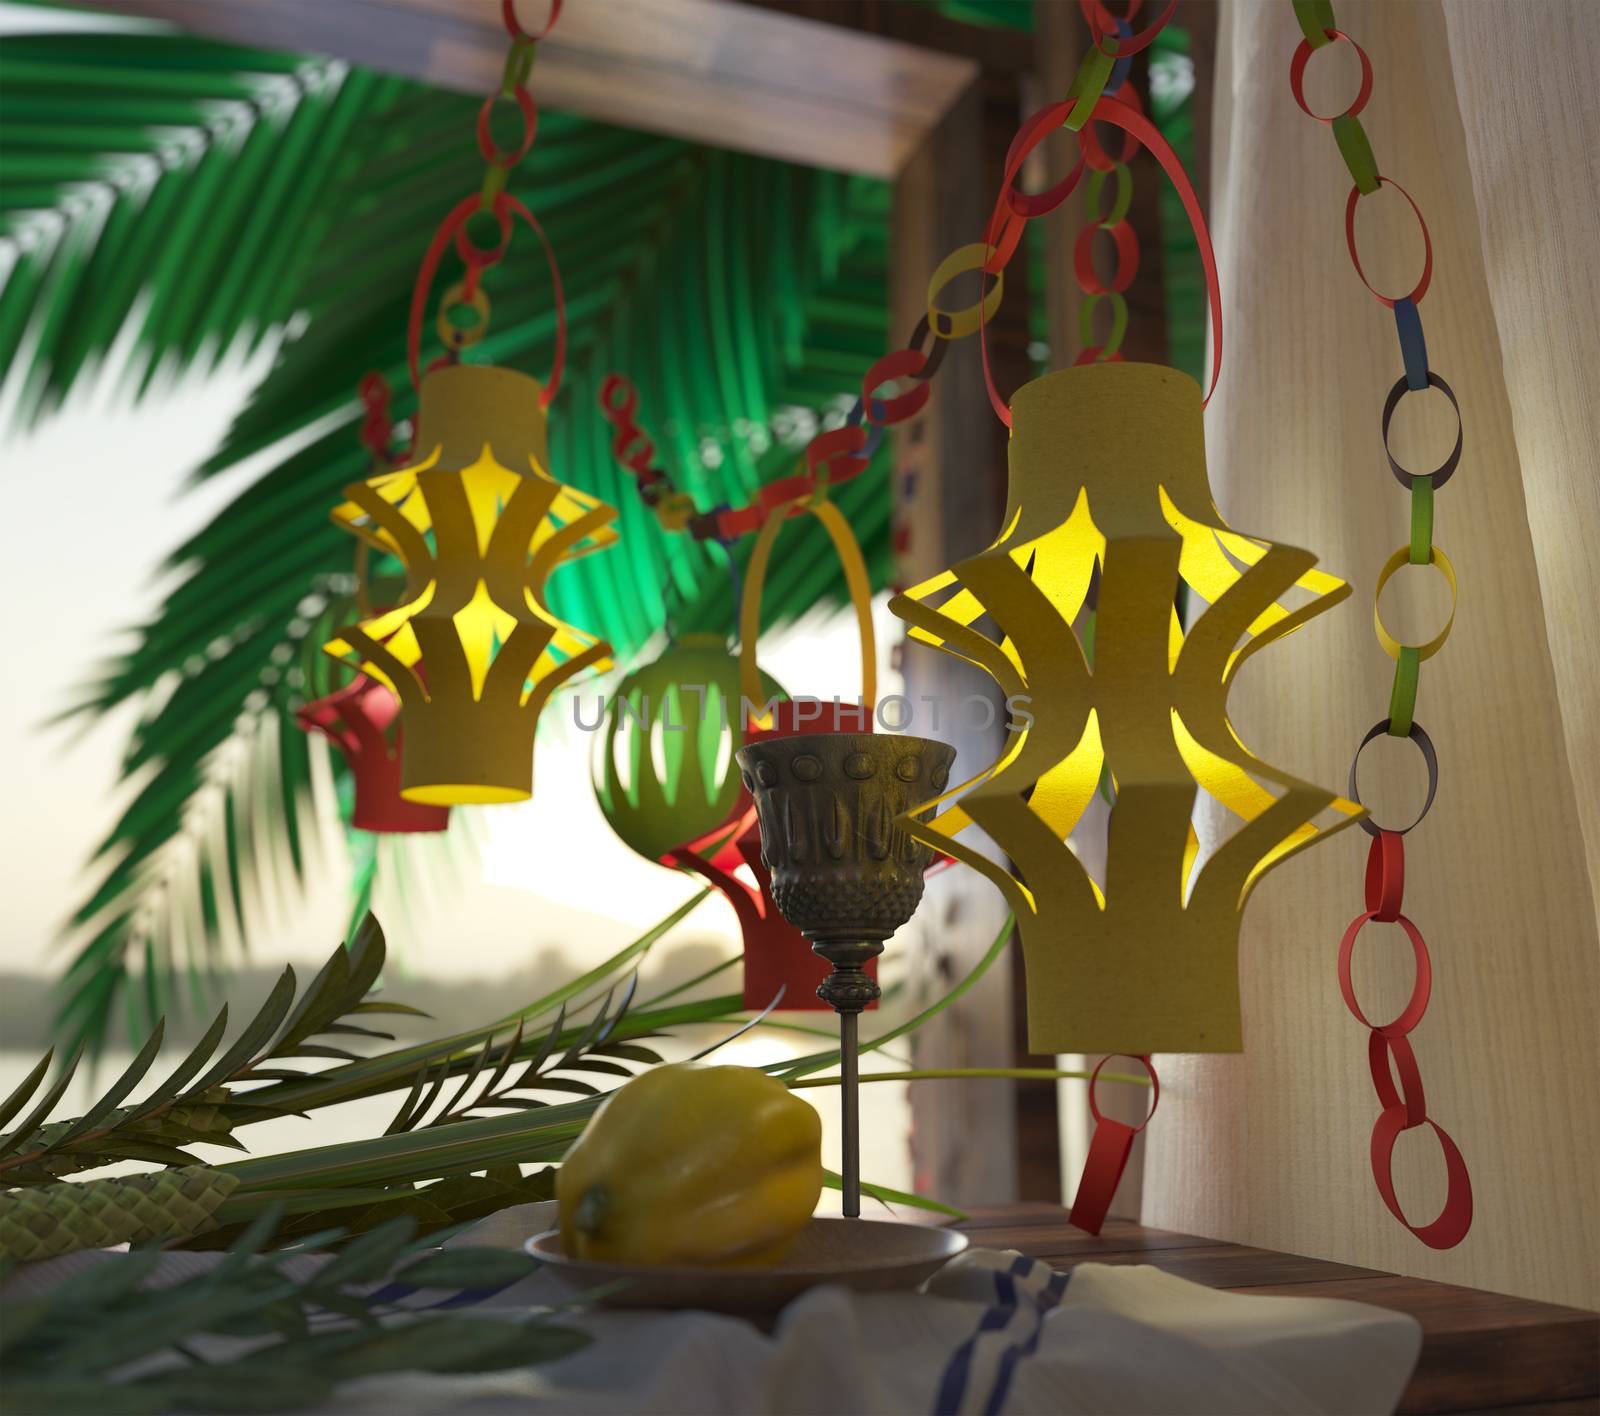 Symbols of the Jewish holiday Sukkot with palm leaves and glass wine 3D illustration by denisgo